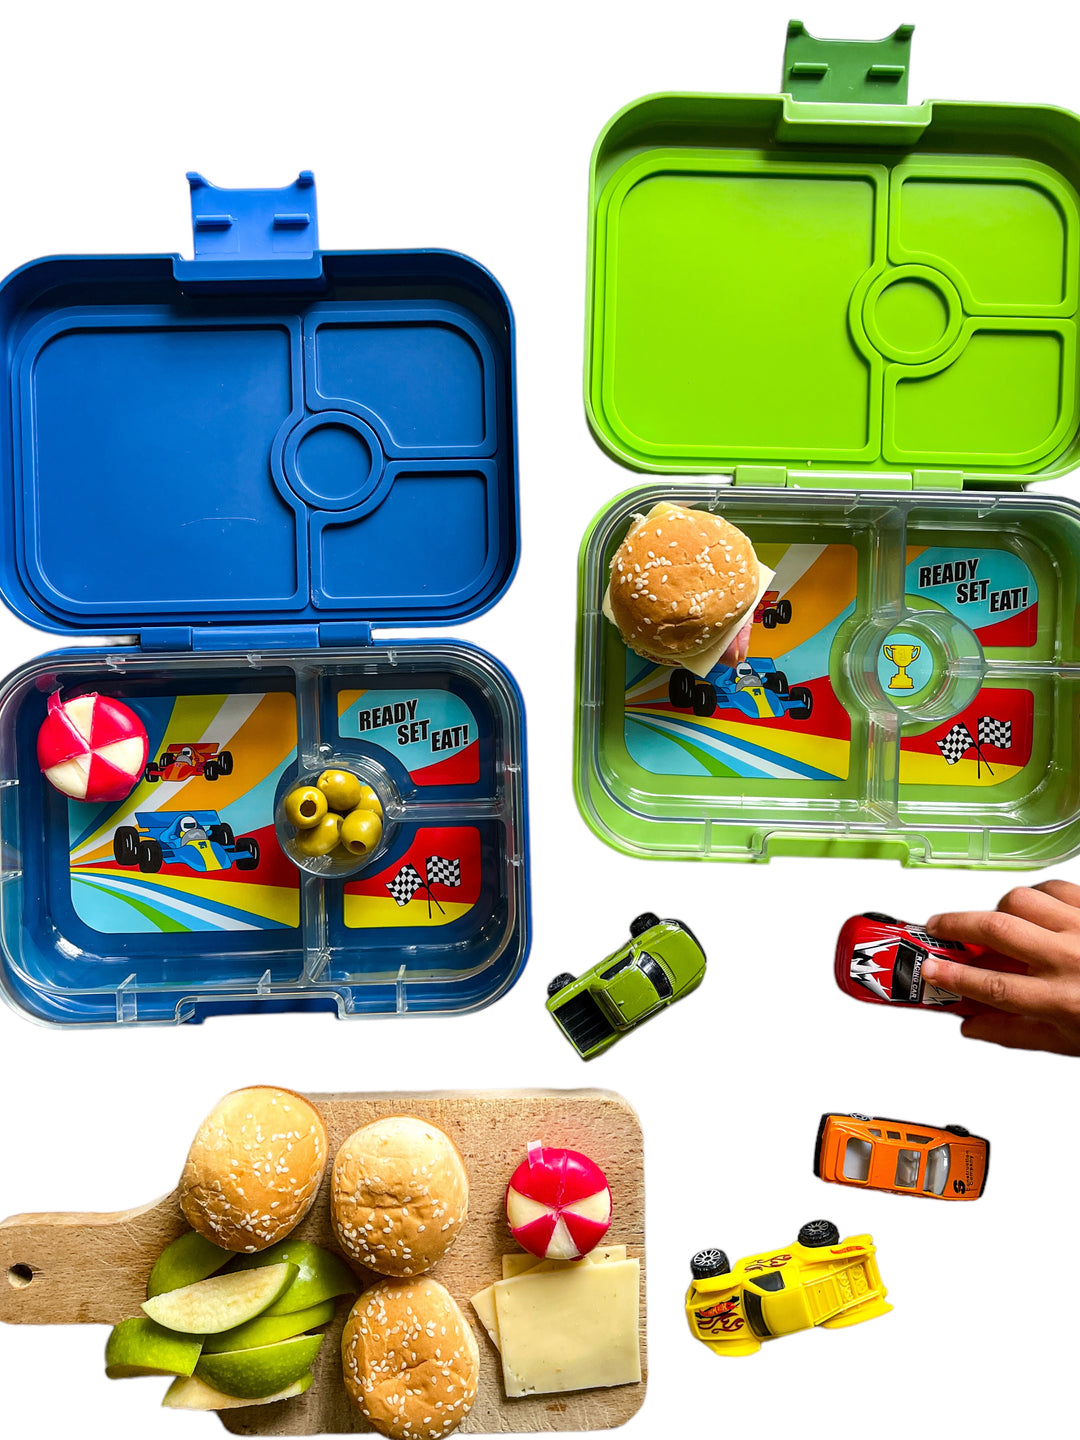 Bluey Lunch Box Kit for Kids Boys Includes Snacks Storage Sandwich Container and Tumbler BPA-Free Dishwasher Safe Toddler-Friendly Lunch Containers